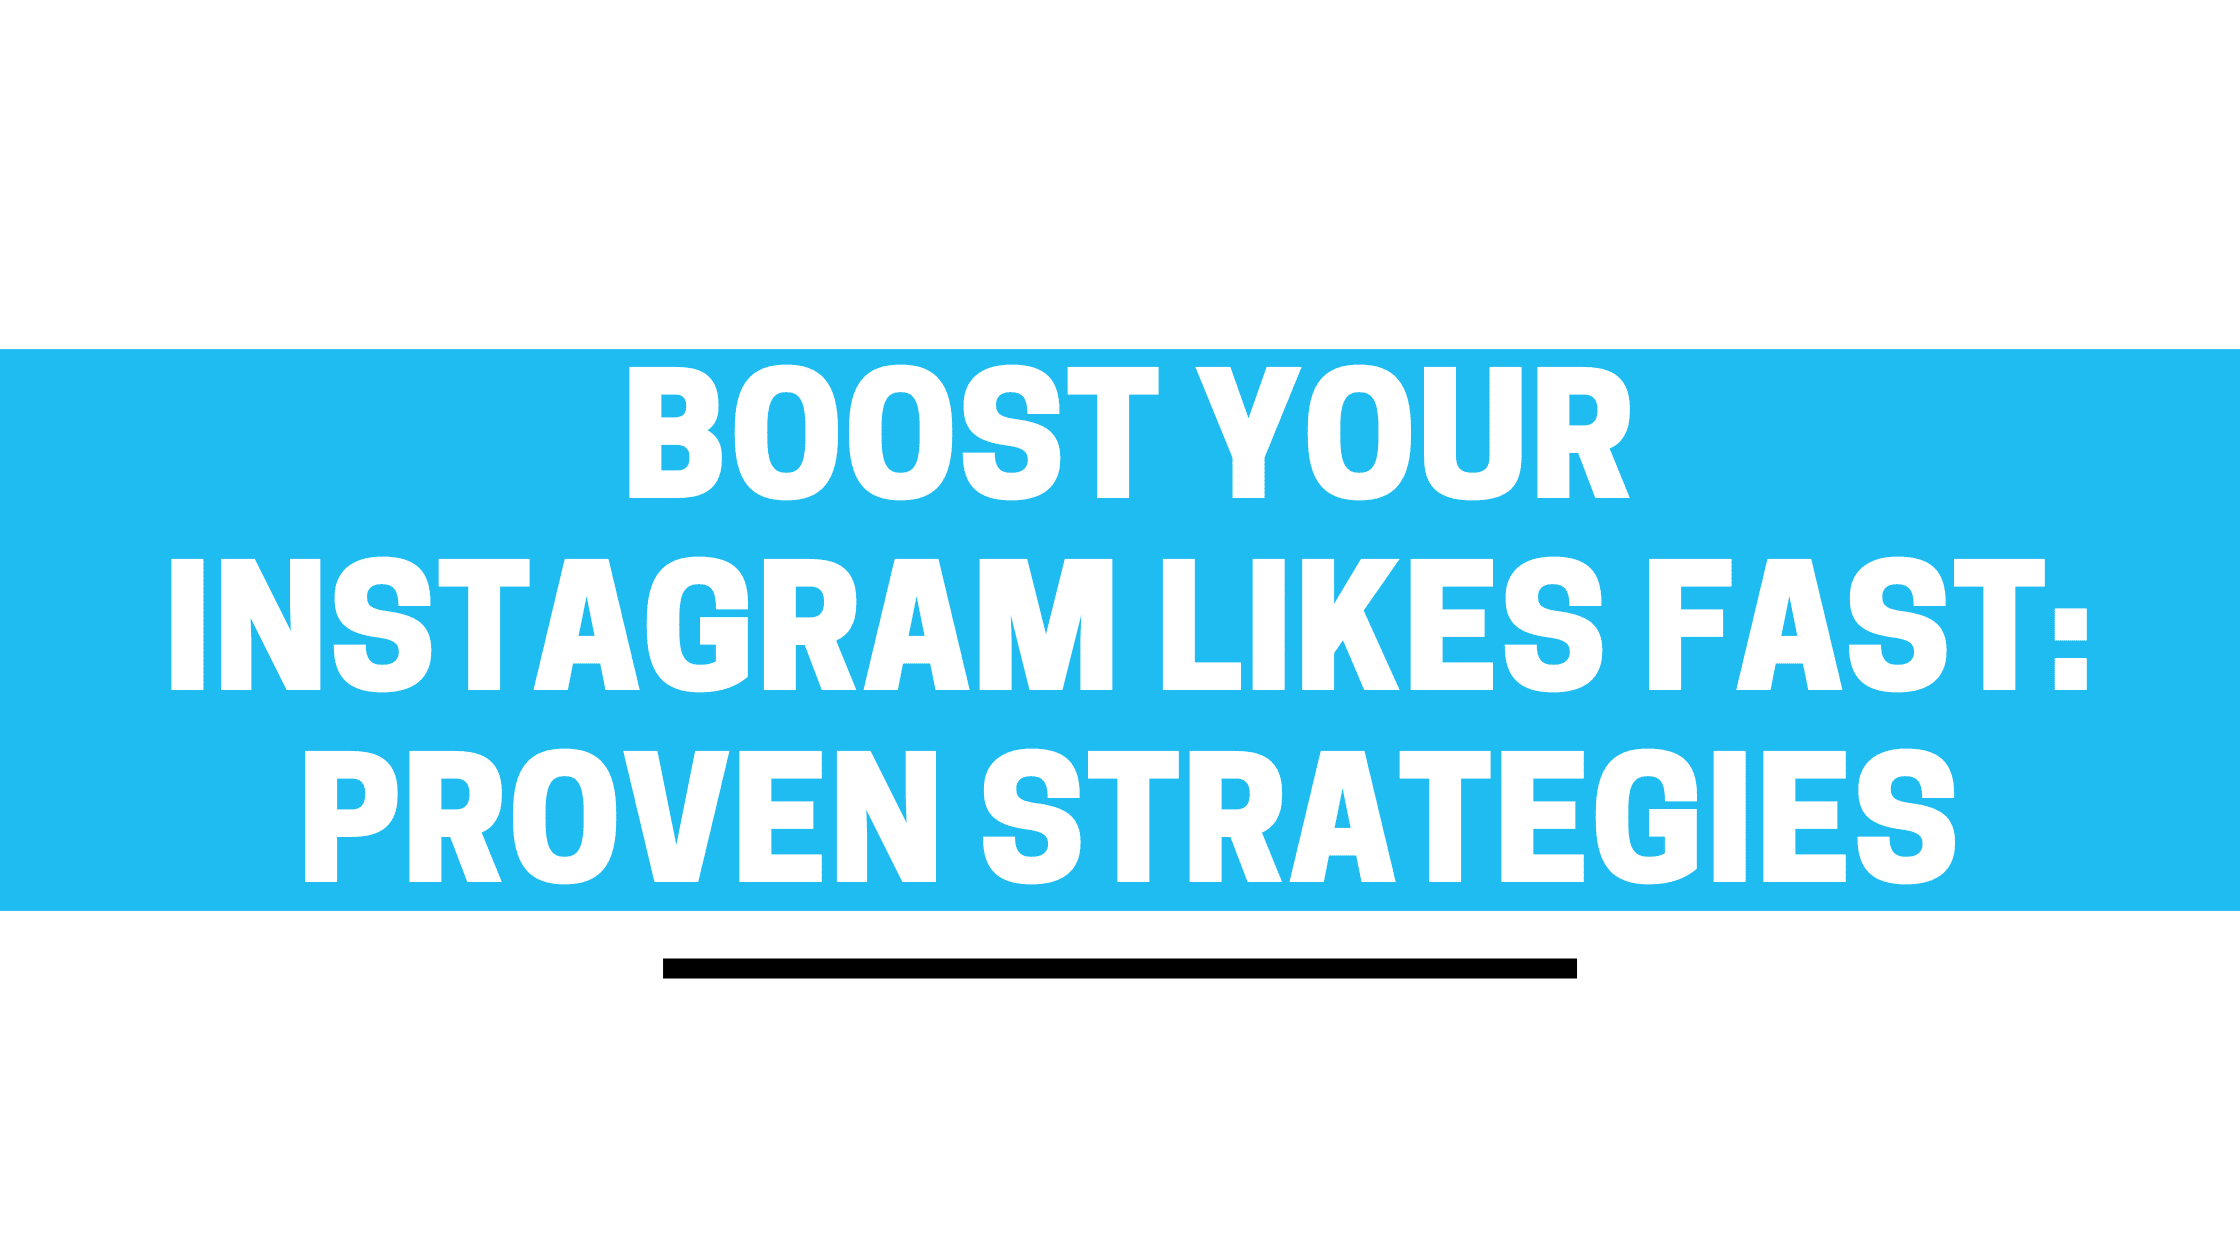 Boost Your Instagram Likes Fast Proven Strategies and Tips